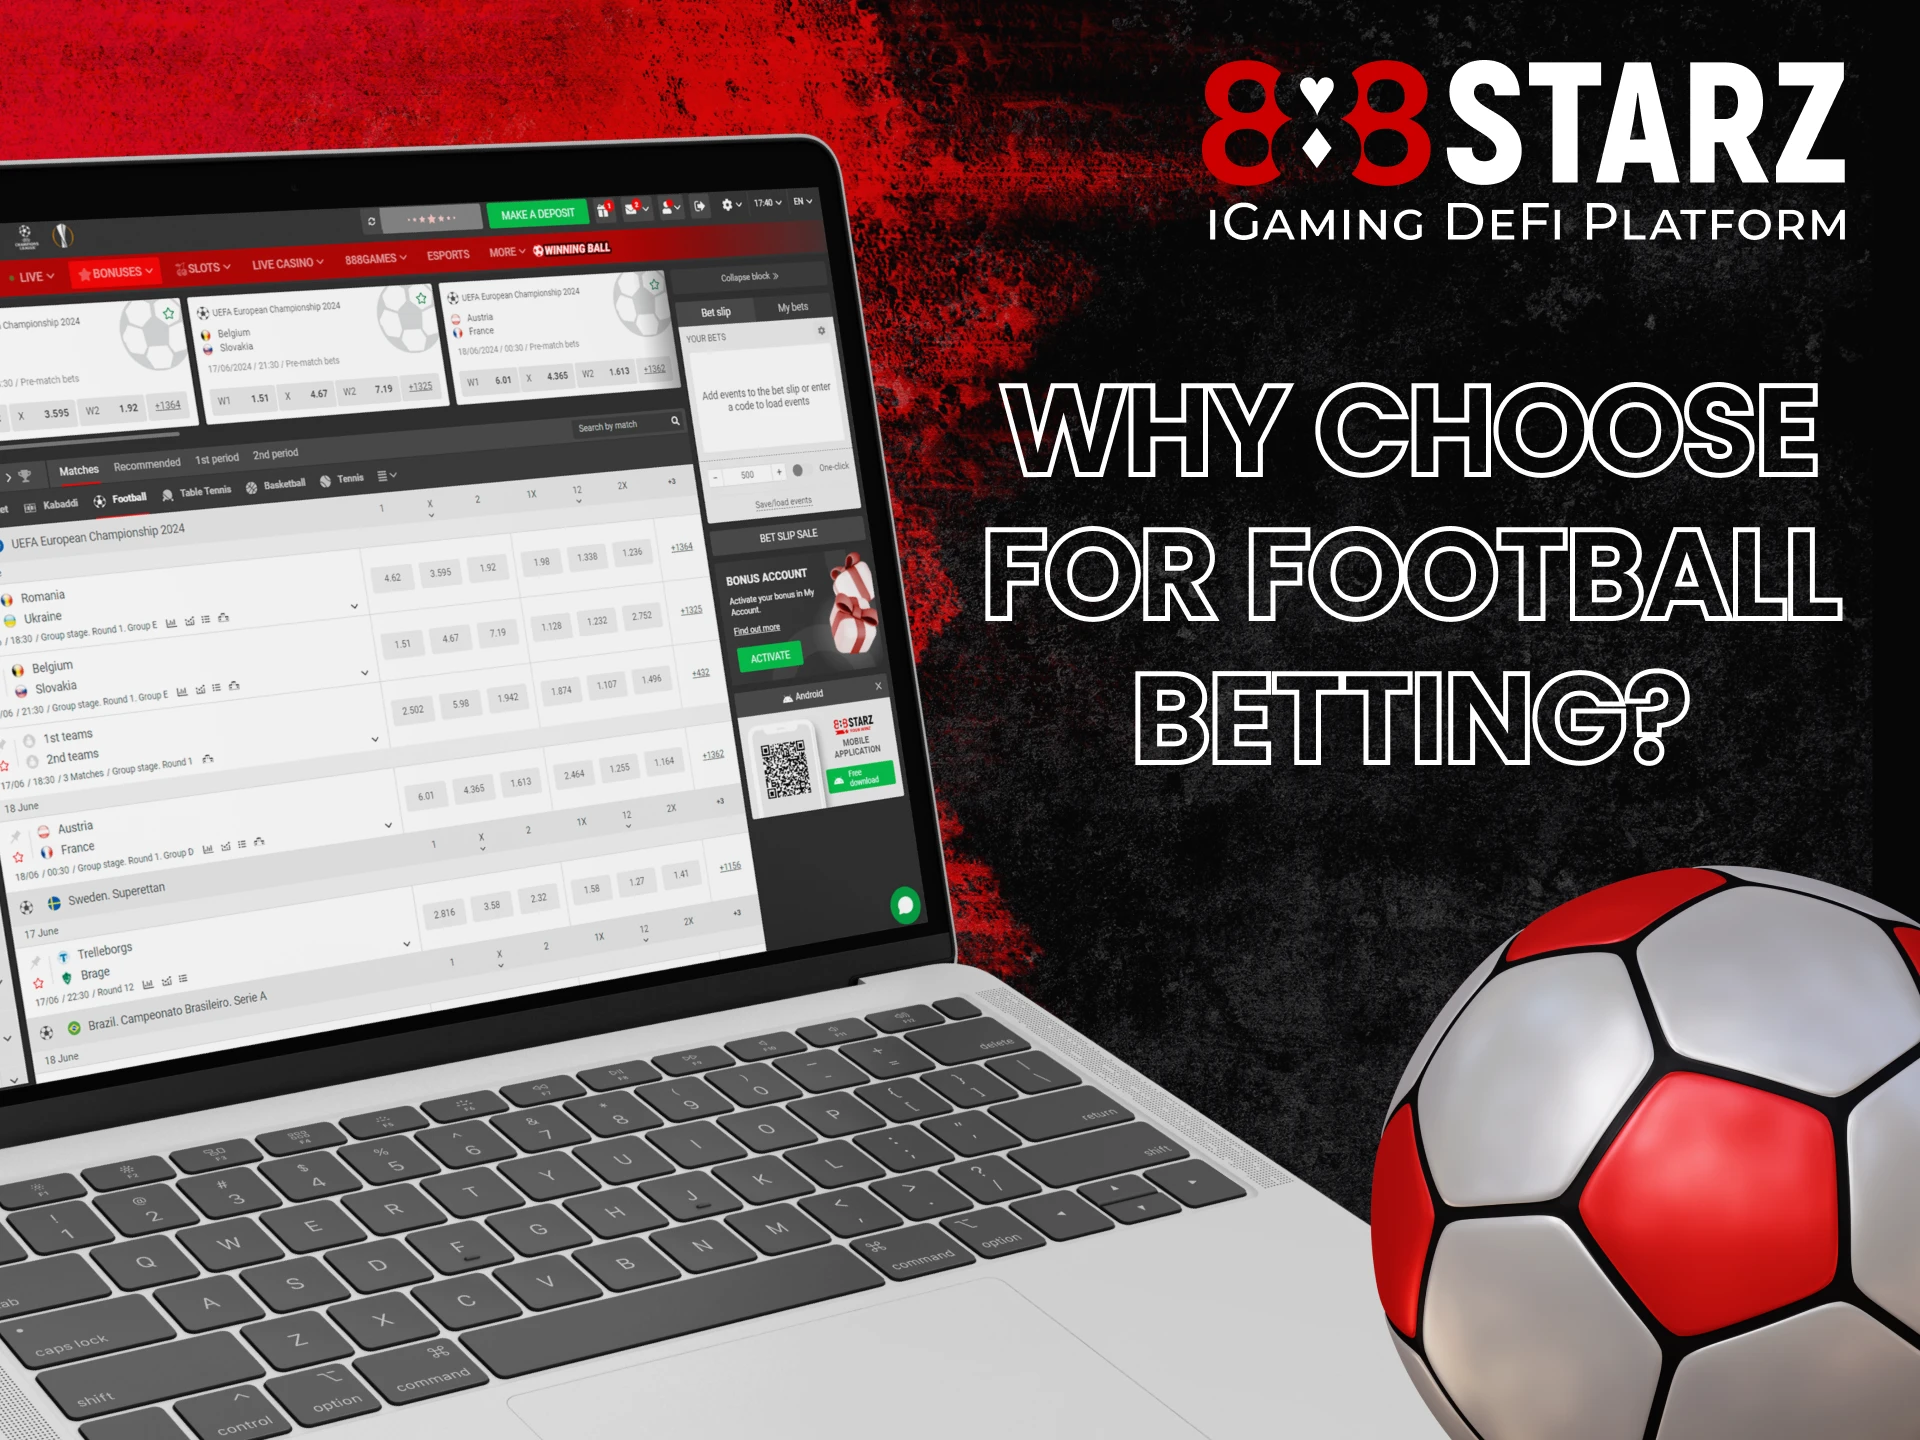 Choose 888Starz if you want to bet on football.